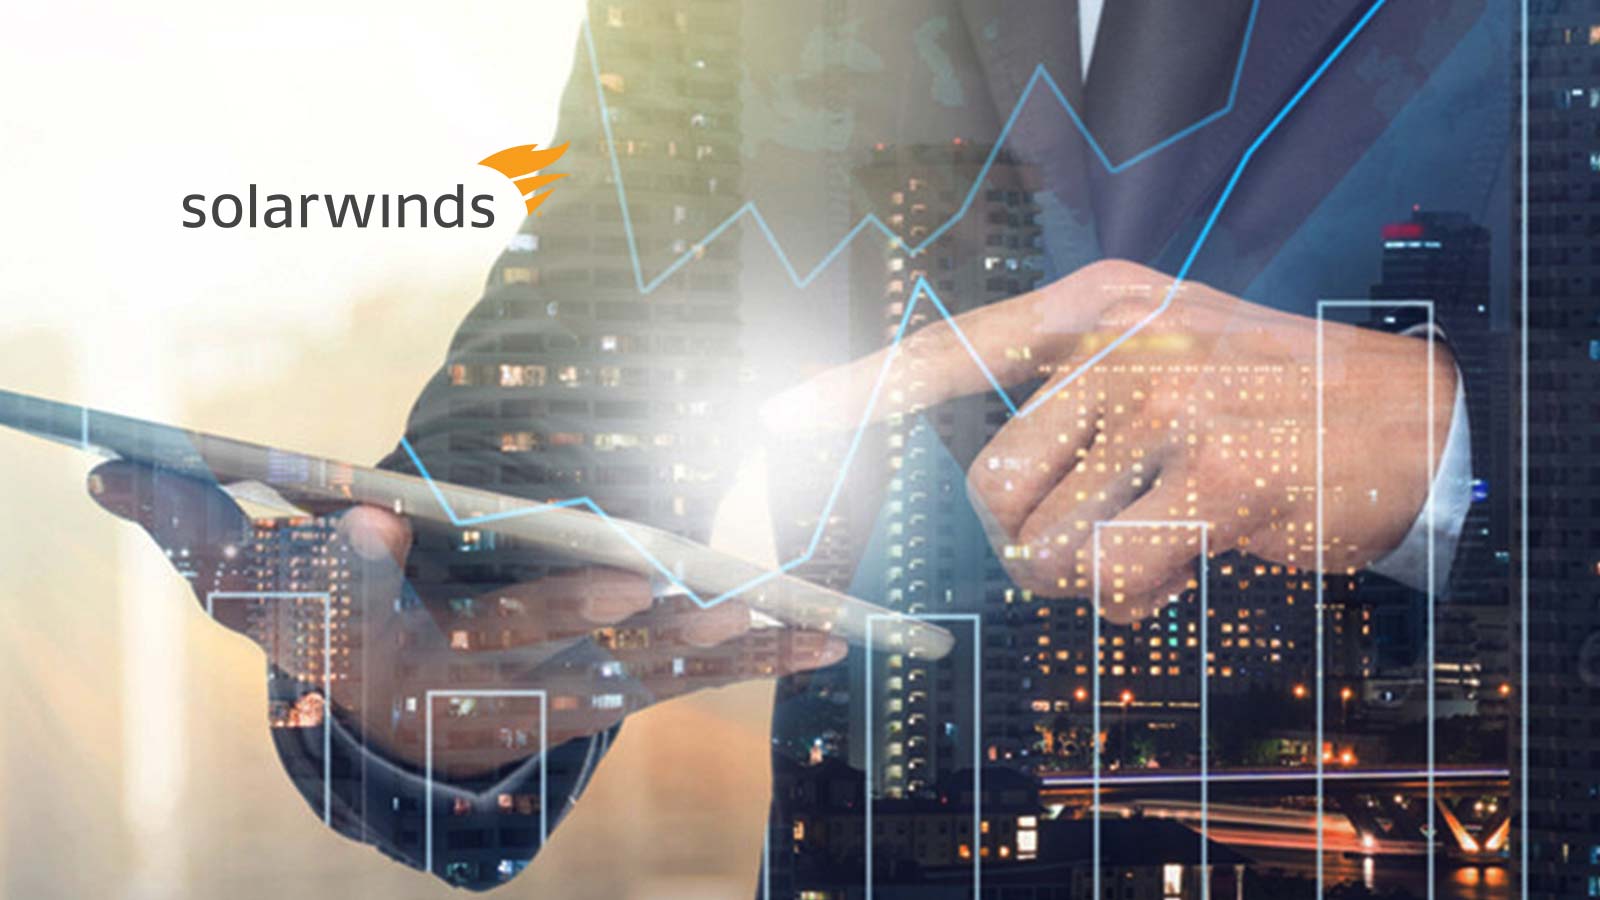 Adfontes Software welcomes IT Service Provider for SolarWinds Network Management